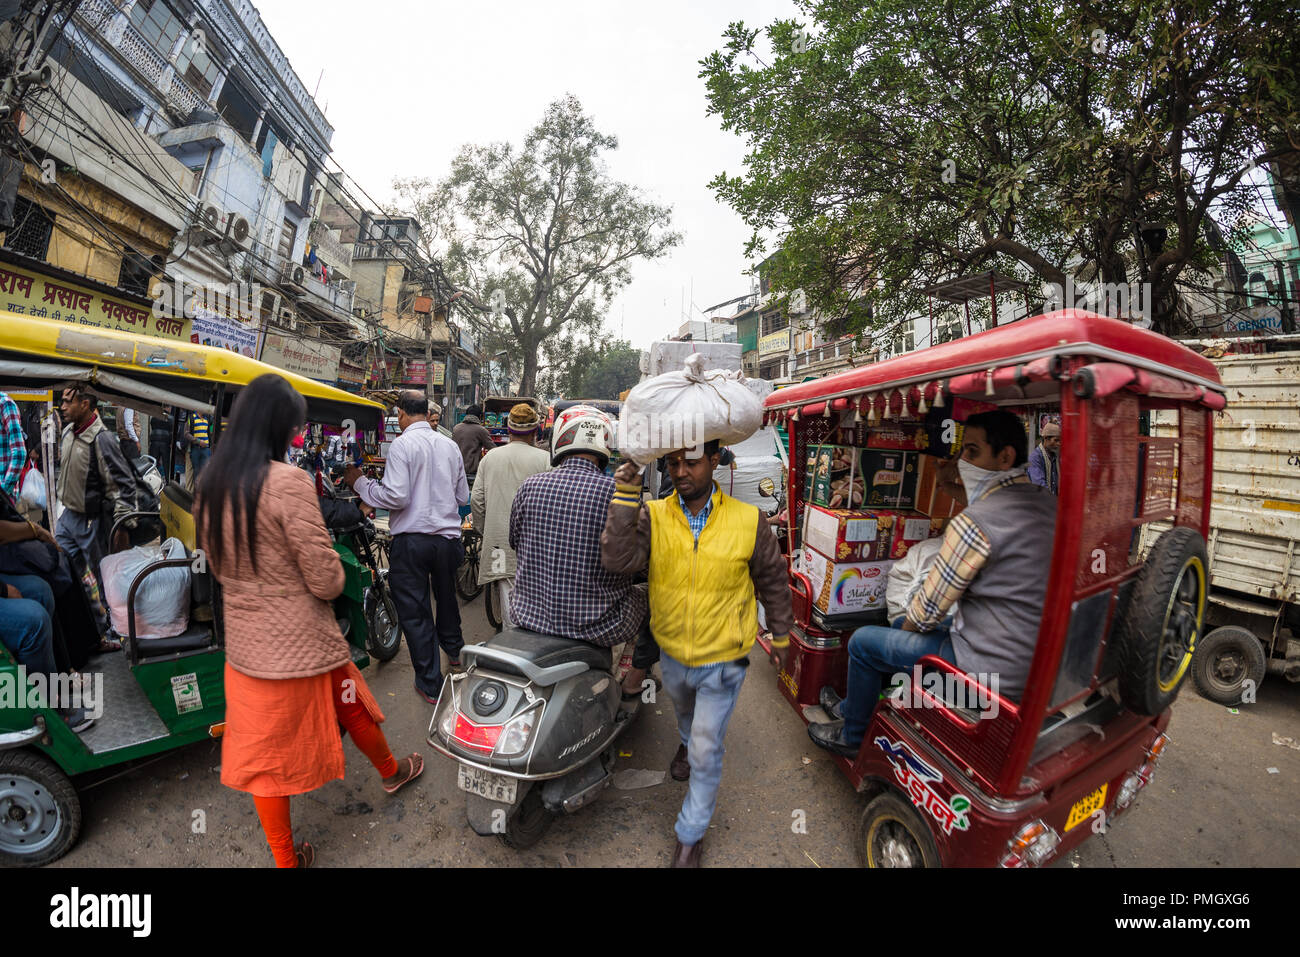 Delhi, India - December 11, 2017: crowd and traffic on street at Chandni Chowk, Old Delhi, famous travel destination in India. Chaotic city life, work Stock Photo